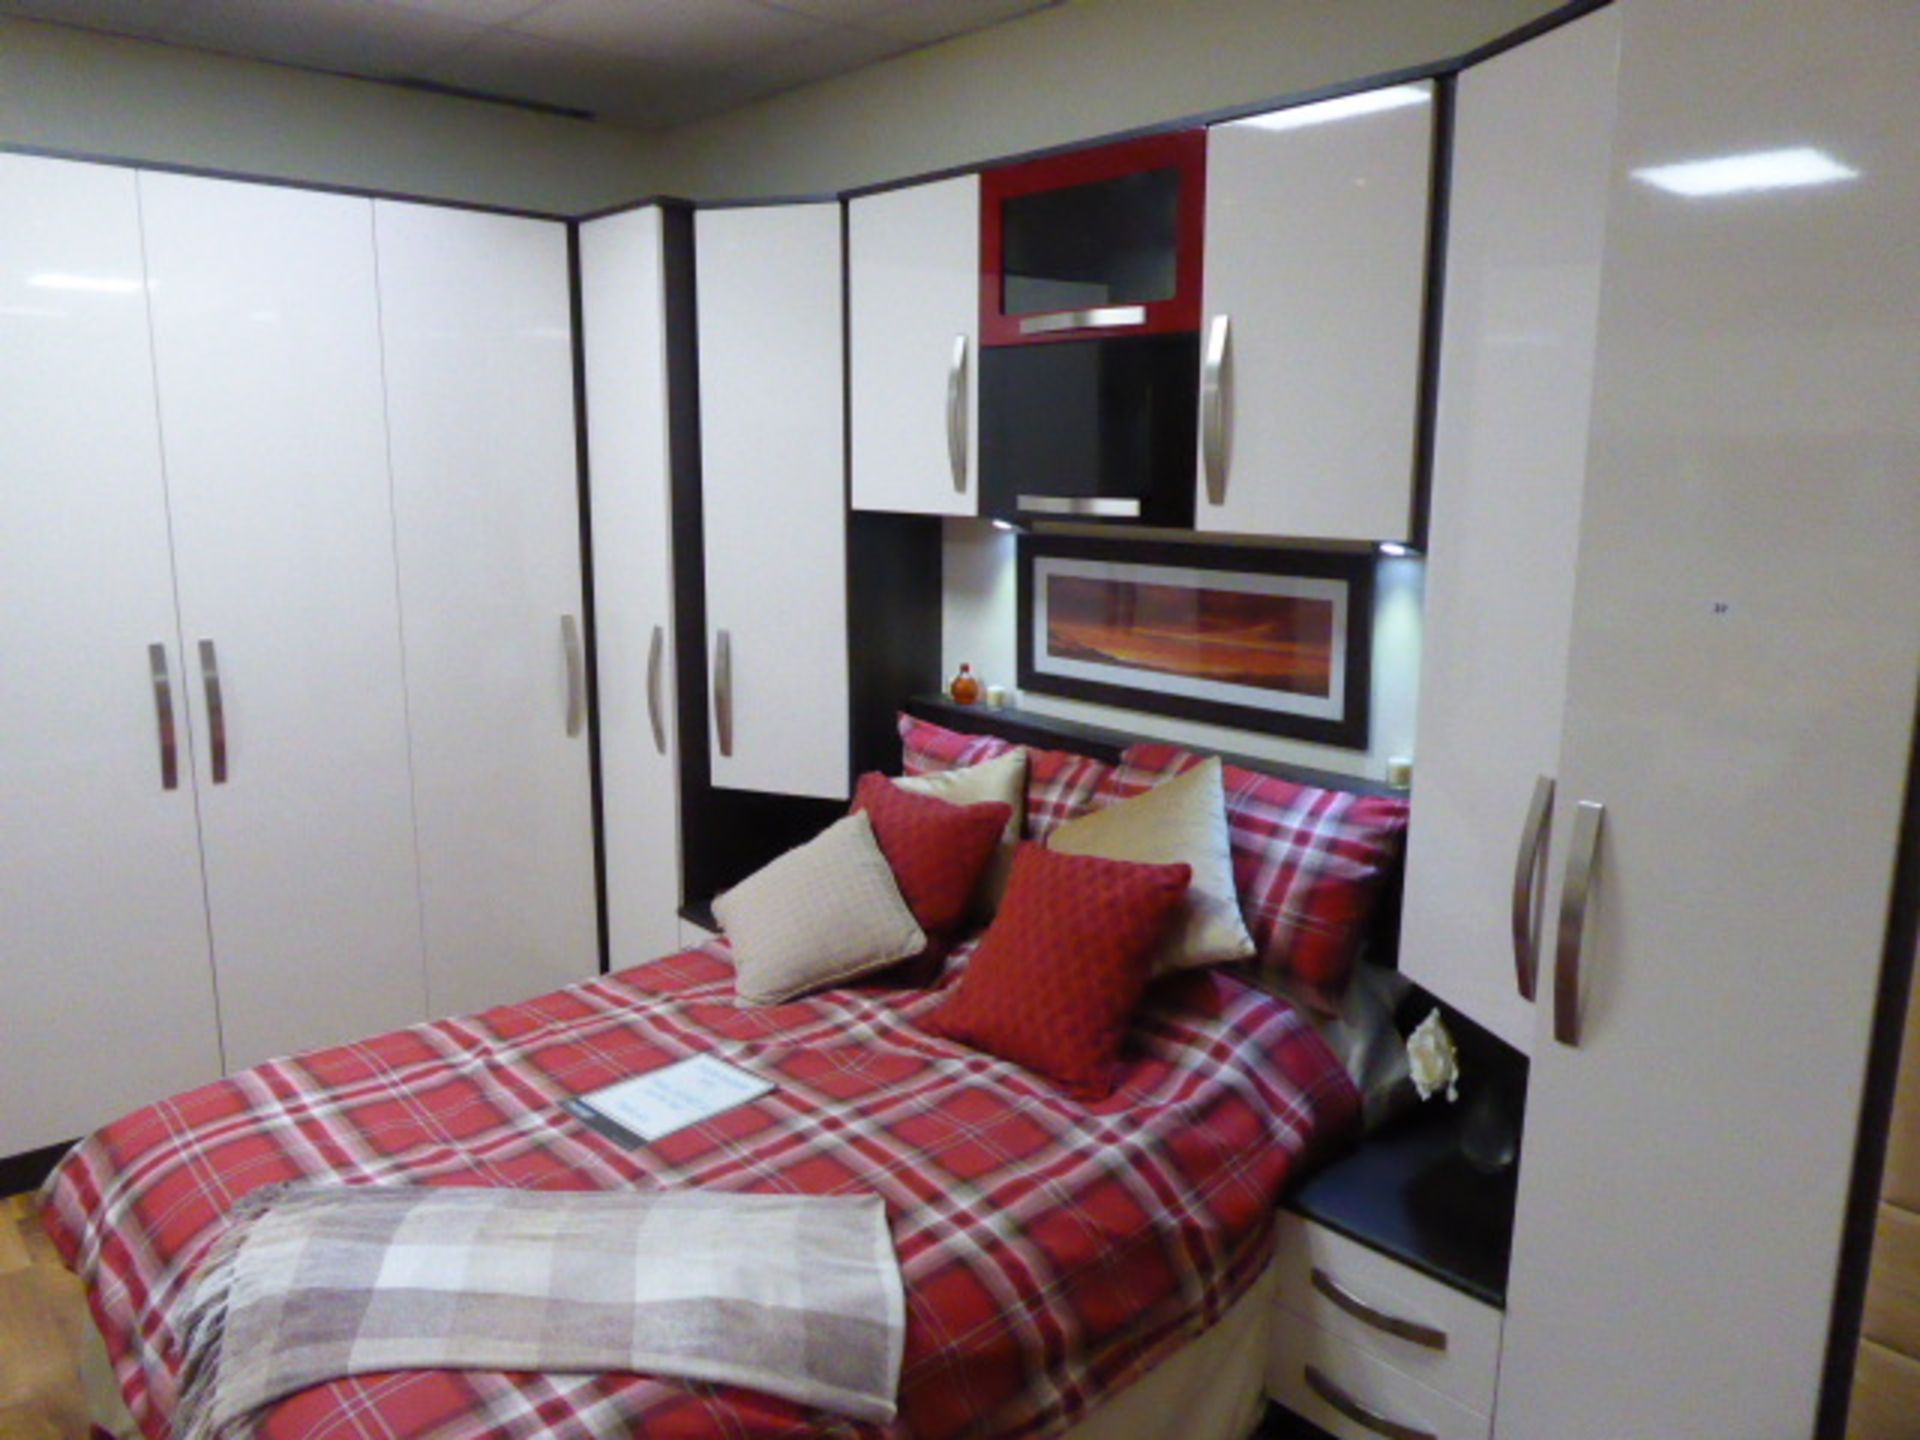 Cubist Gloss Plain Ivory built in bedroom suite comprising of wardrobes, bedside drawers, over bed